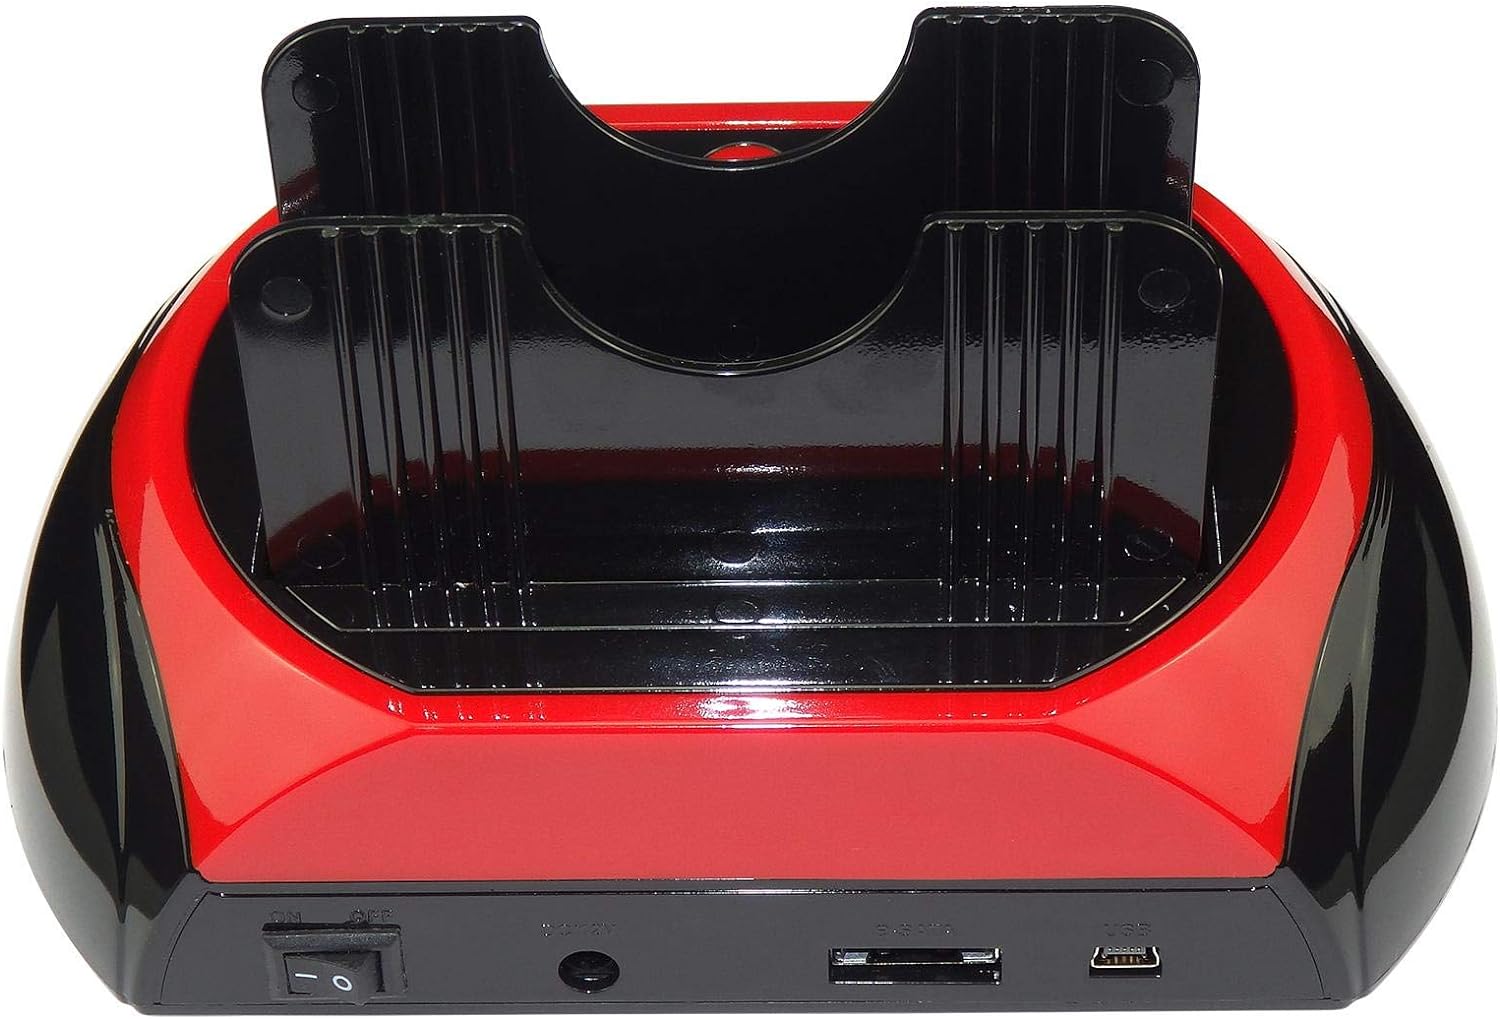 Xtech All in One IDE SATA Dual Hard Drive Docking Station and Card Reader - Black and Red